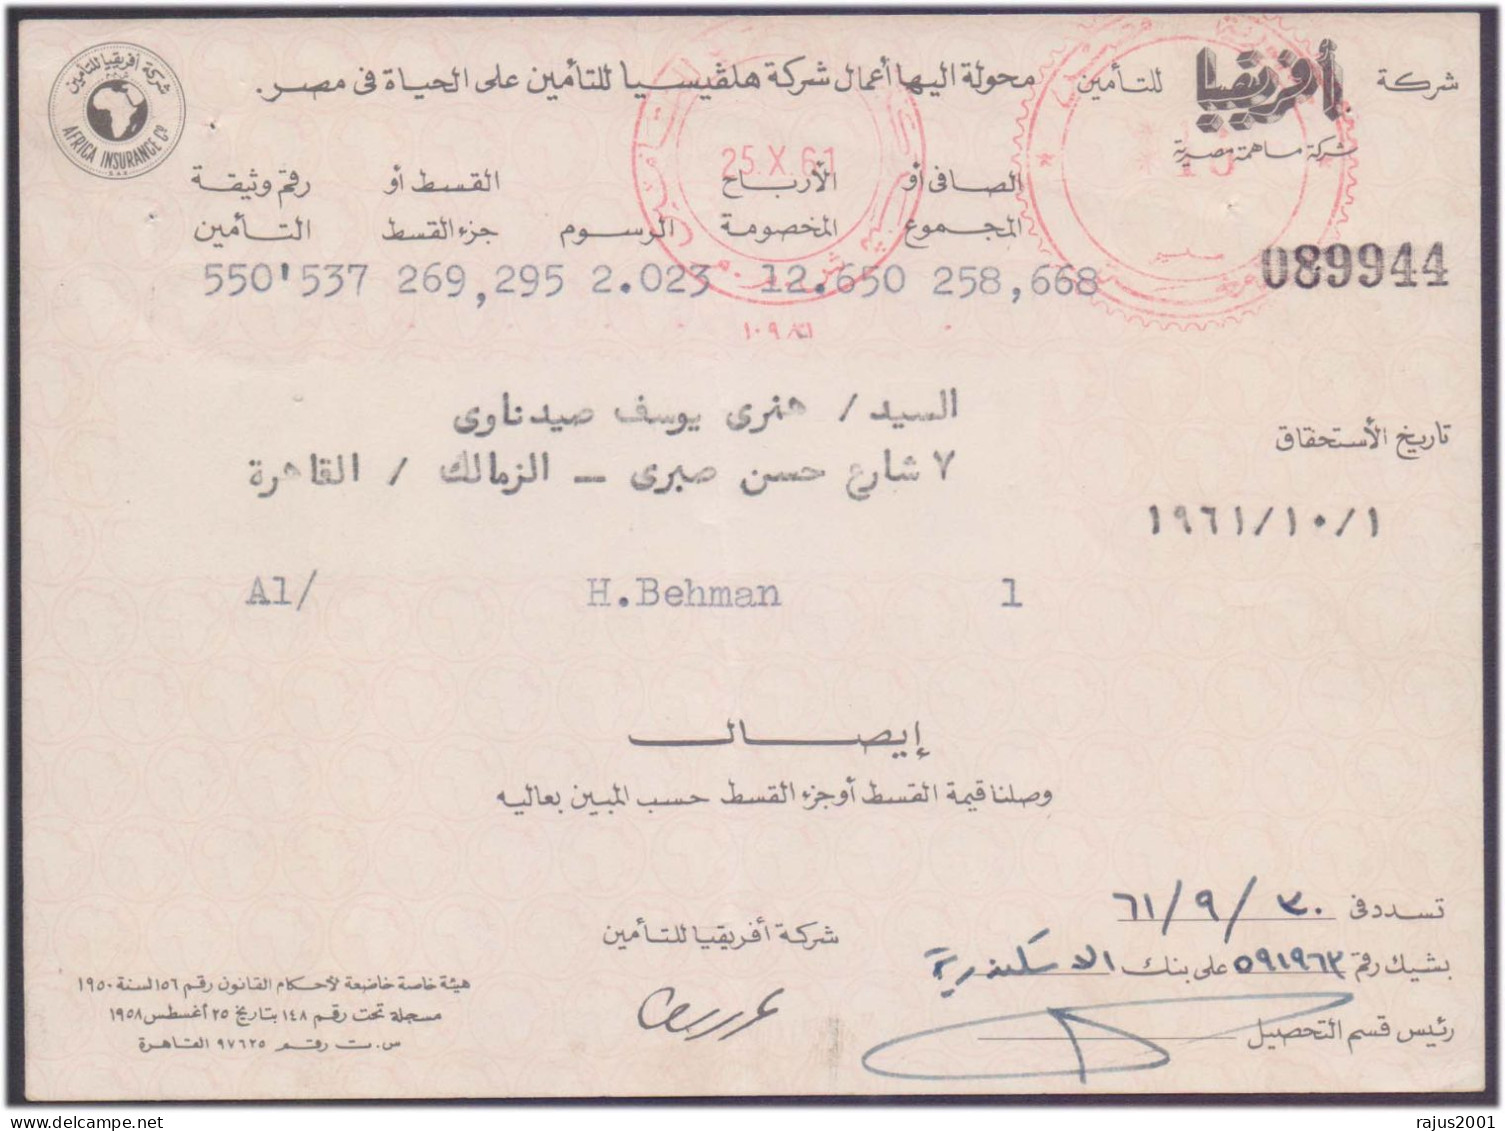 Business Of Helqisia Life Insurance Company In Egypt, RED METER FRANK, EMA, Receipt Old Document Egypt 1960 - Storia Postale